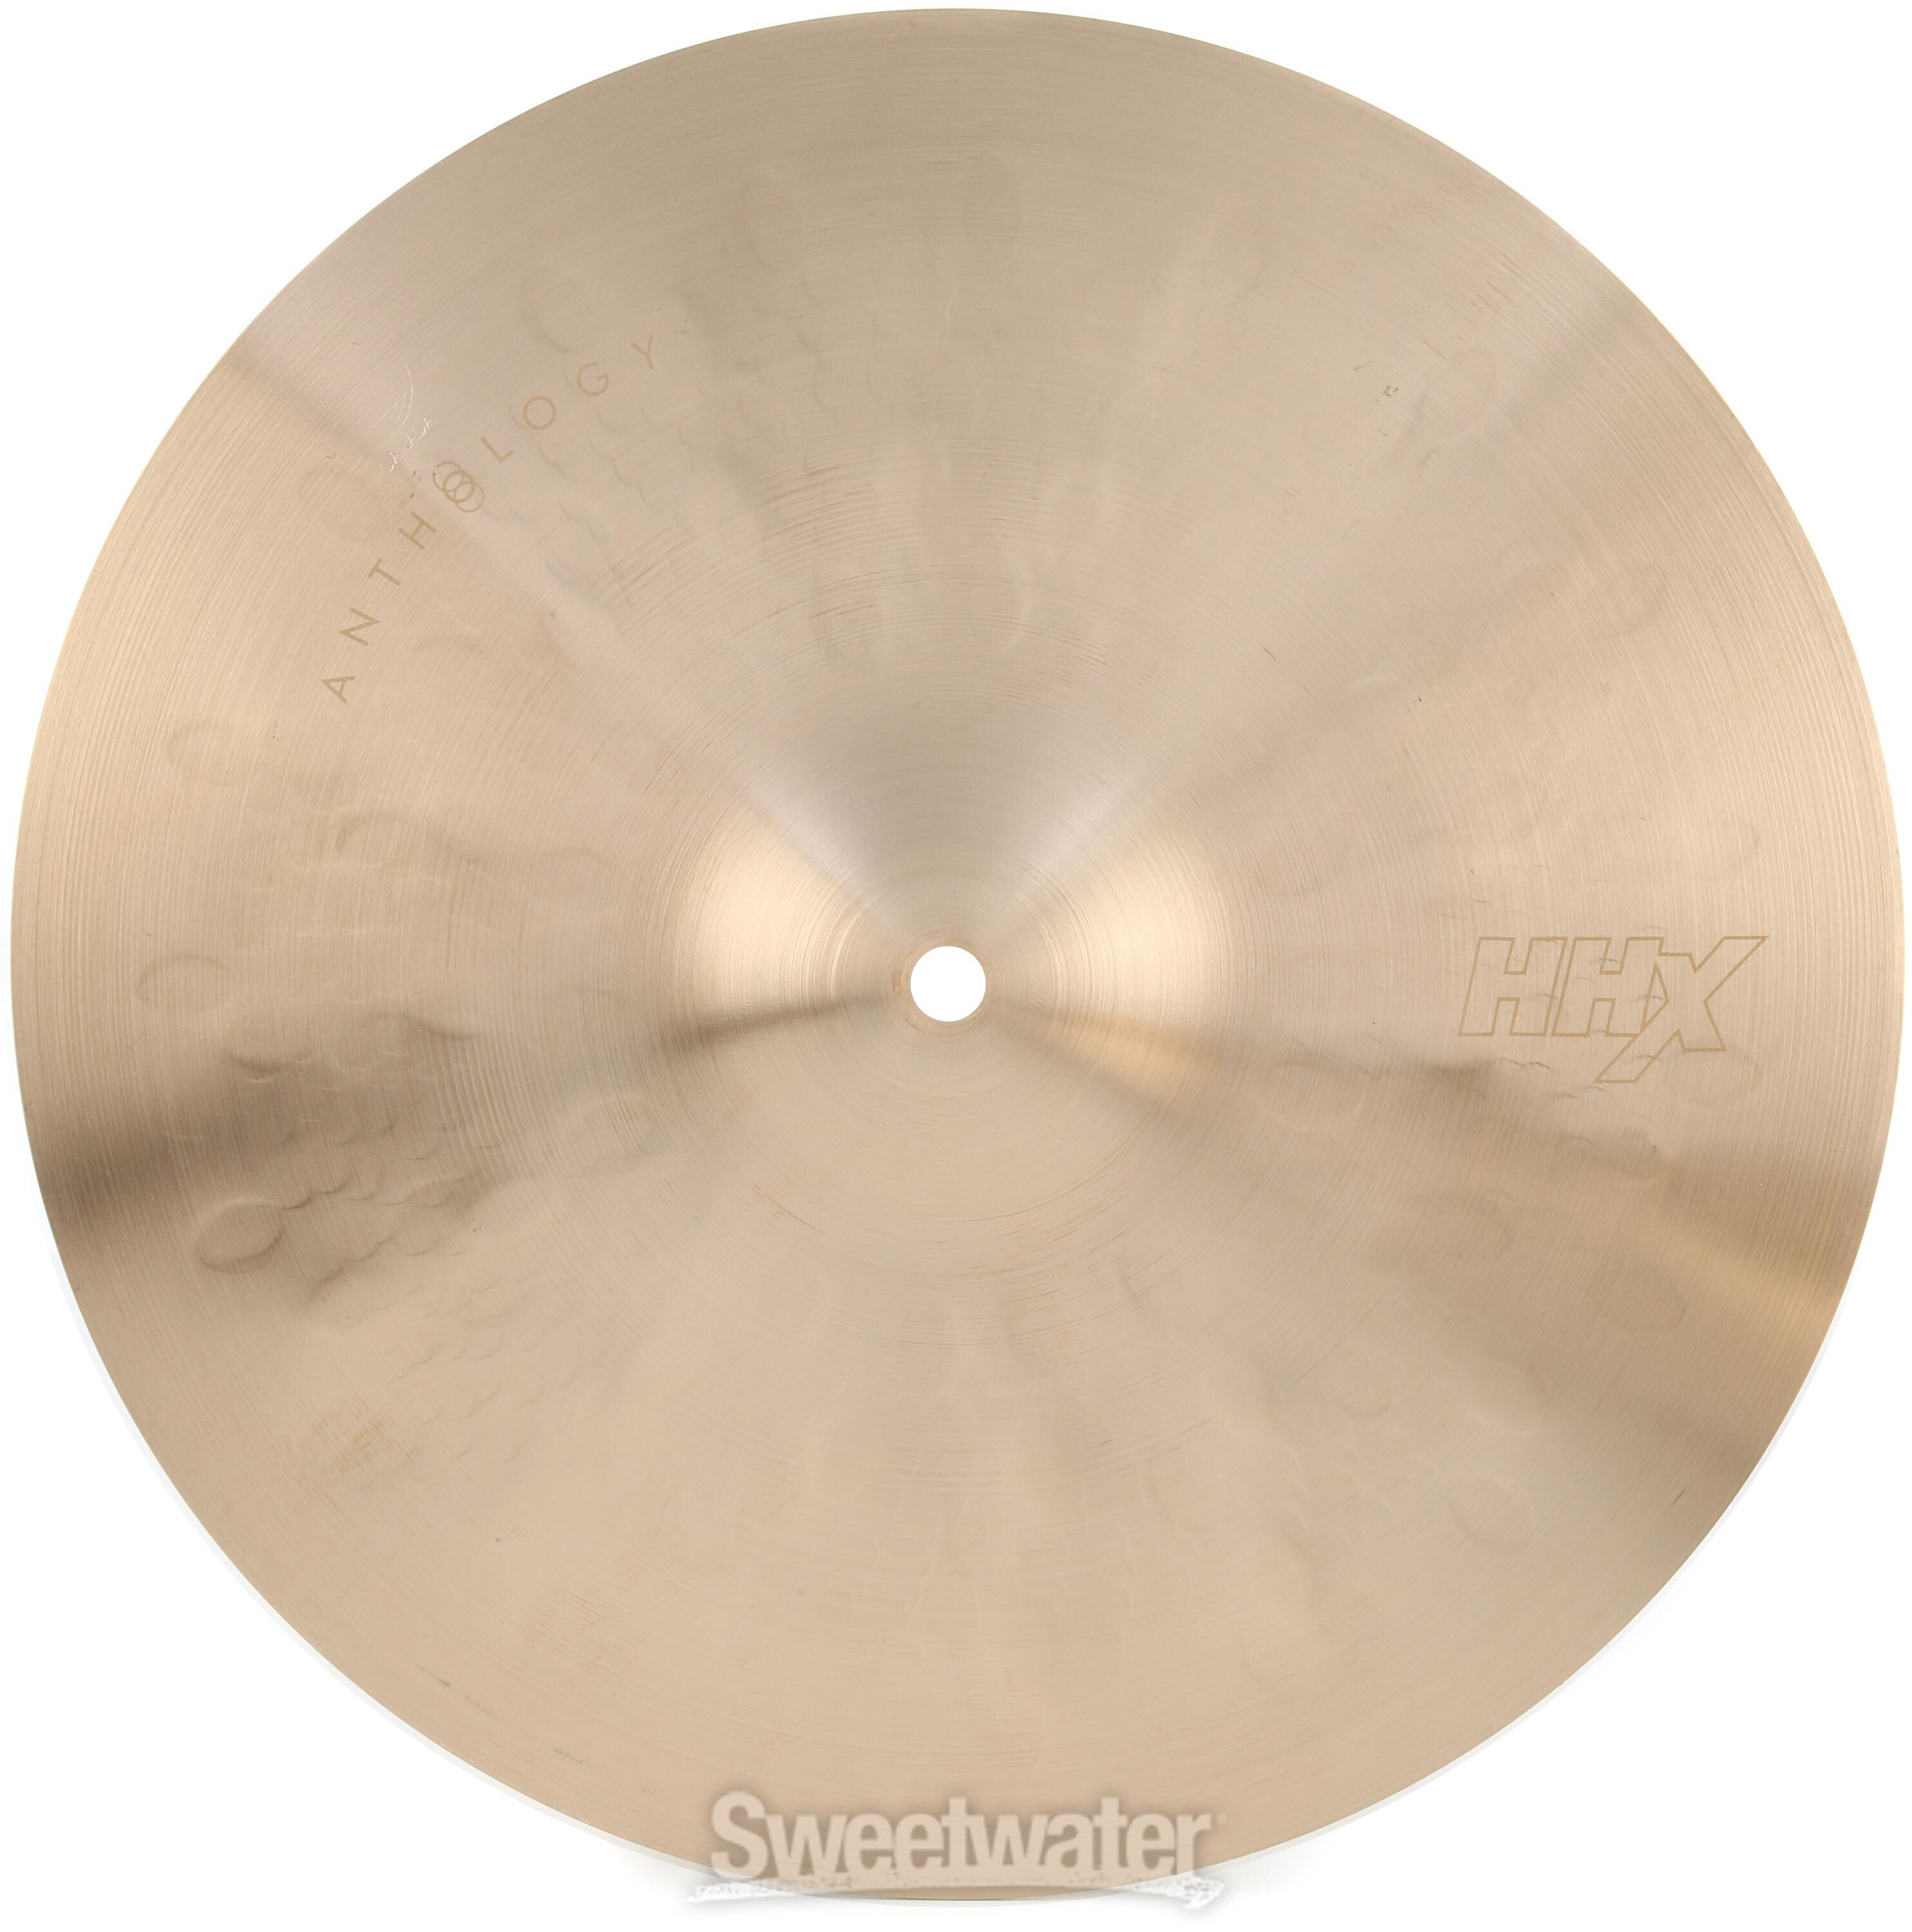 Sabian HHX Anthology Hi-hat Cymbals - 14-inch, Low Bell | Sweetwater